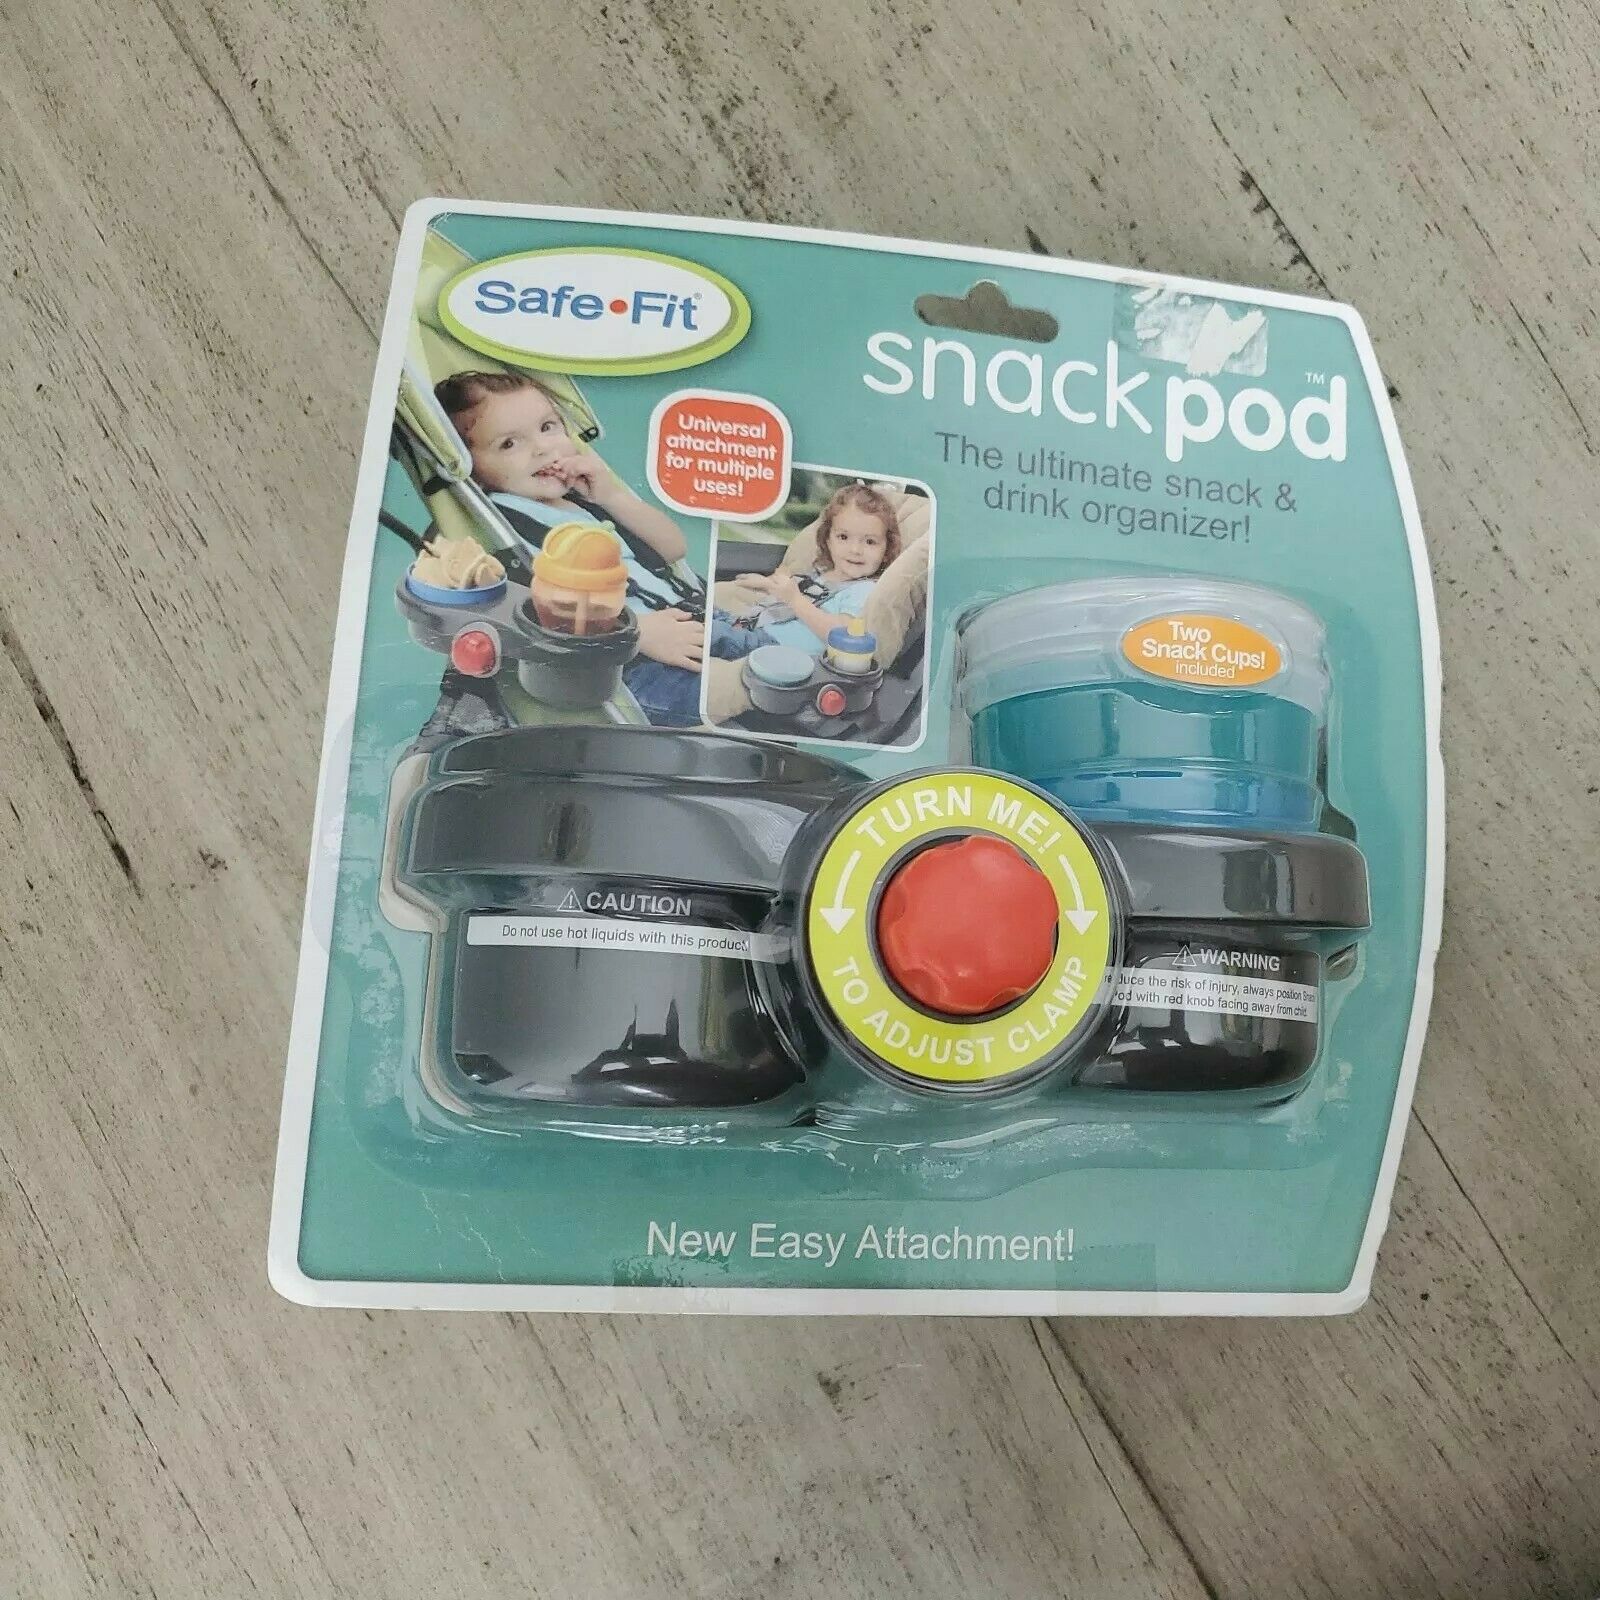 Safefit Snack Pod The Ultimate Snack & Drink Organizer With 2 Snack Cup